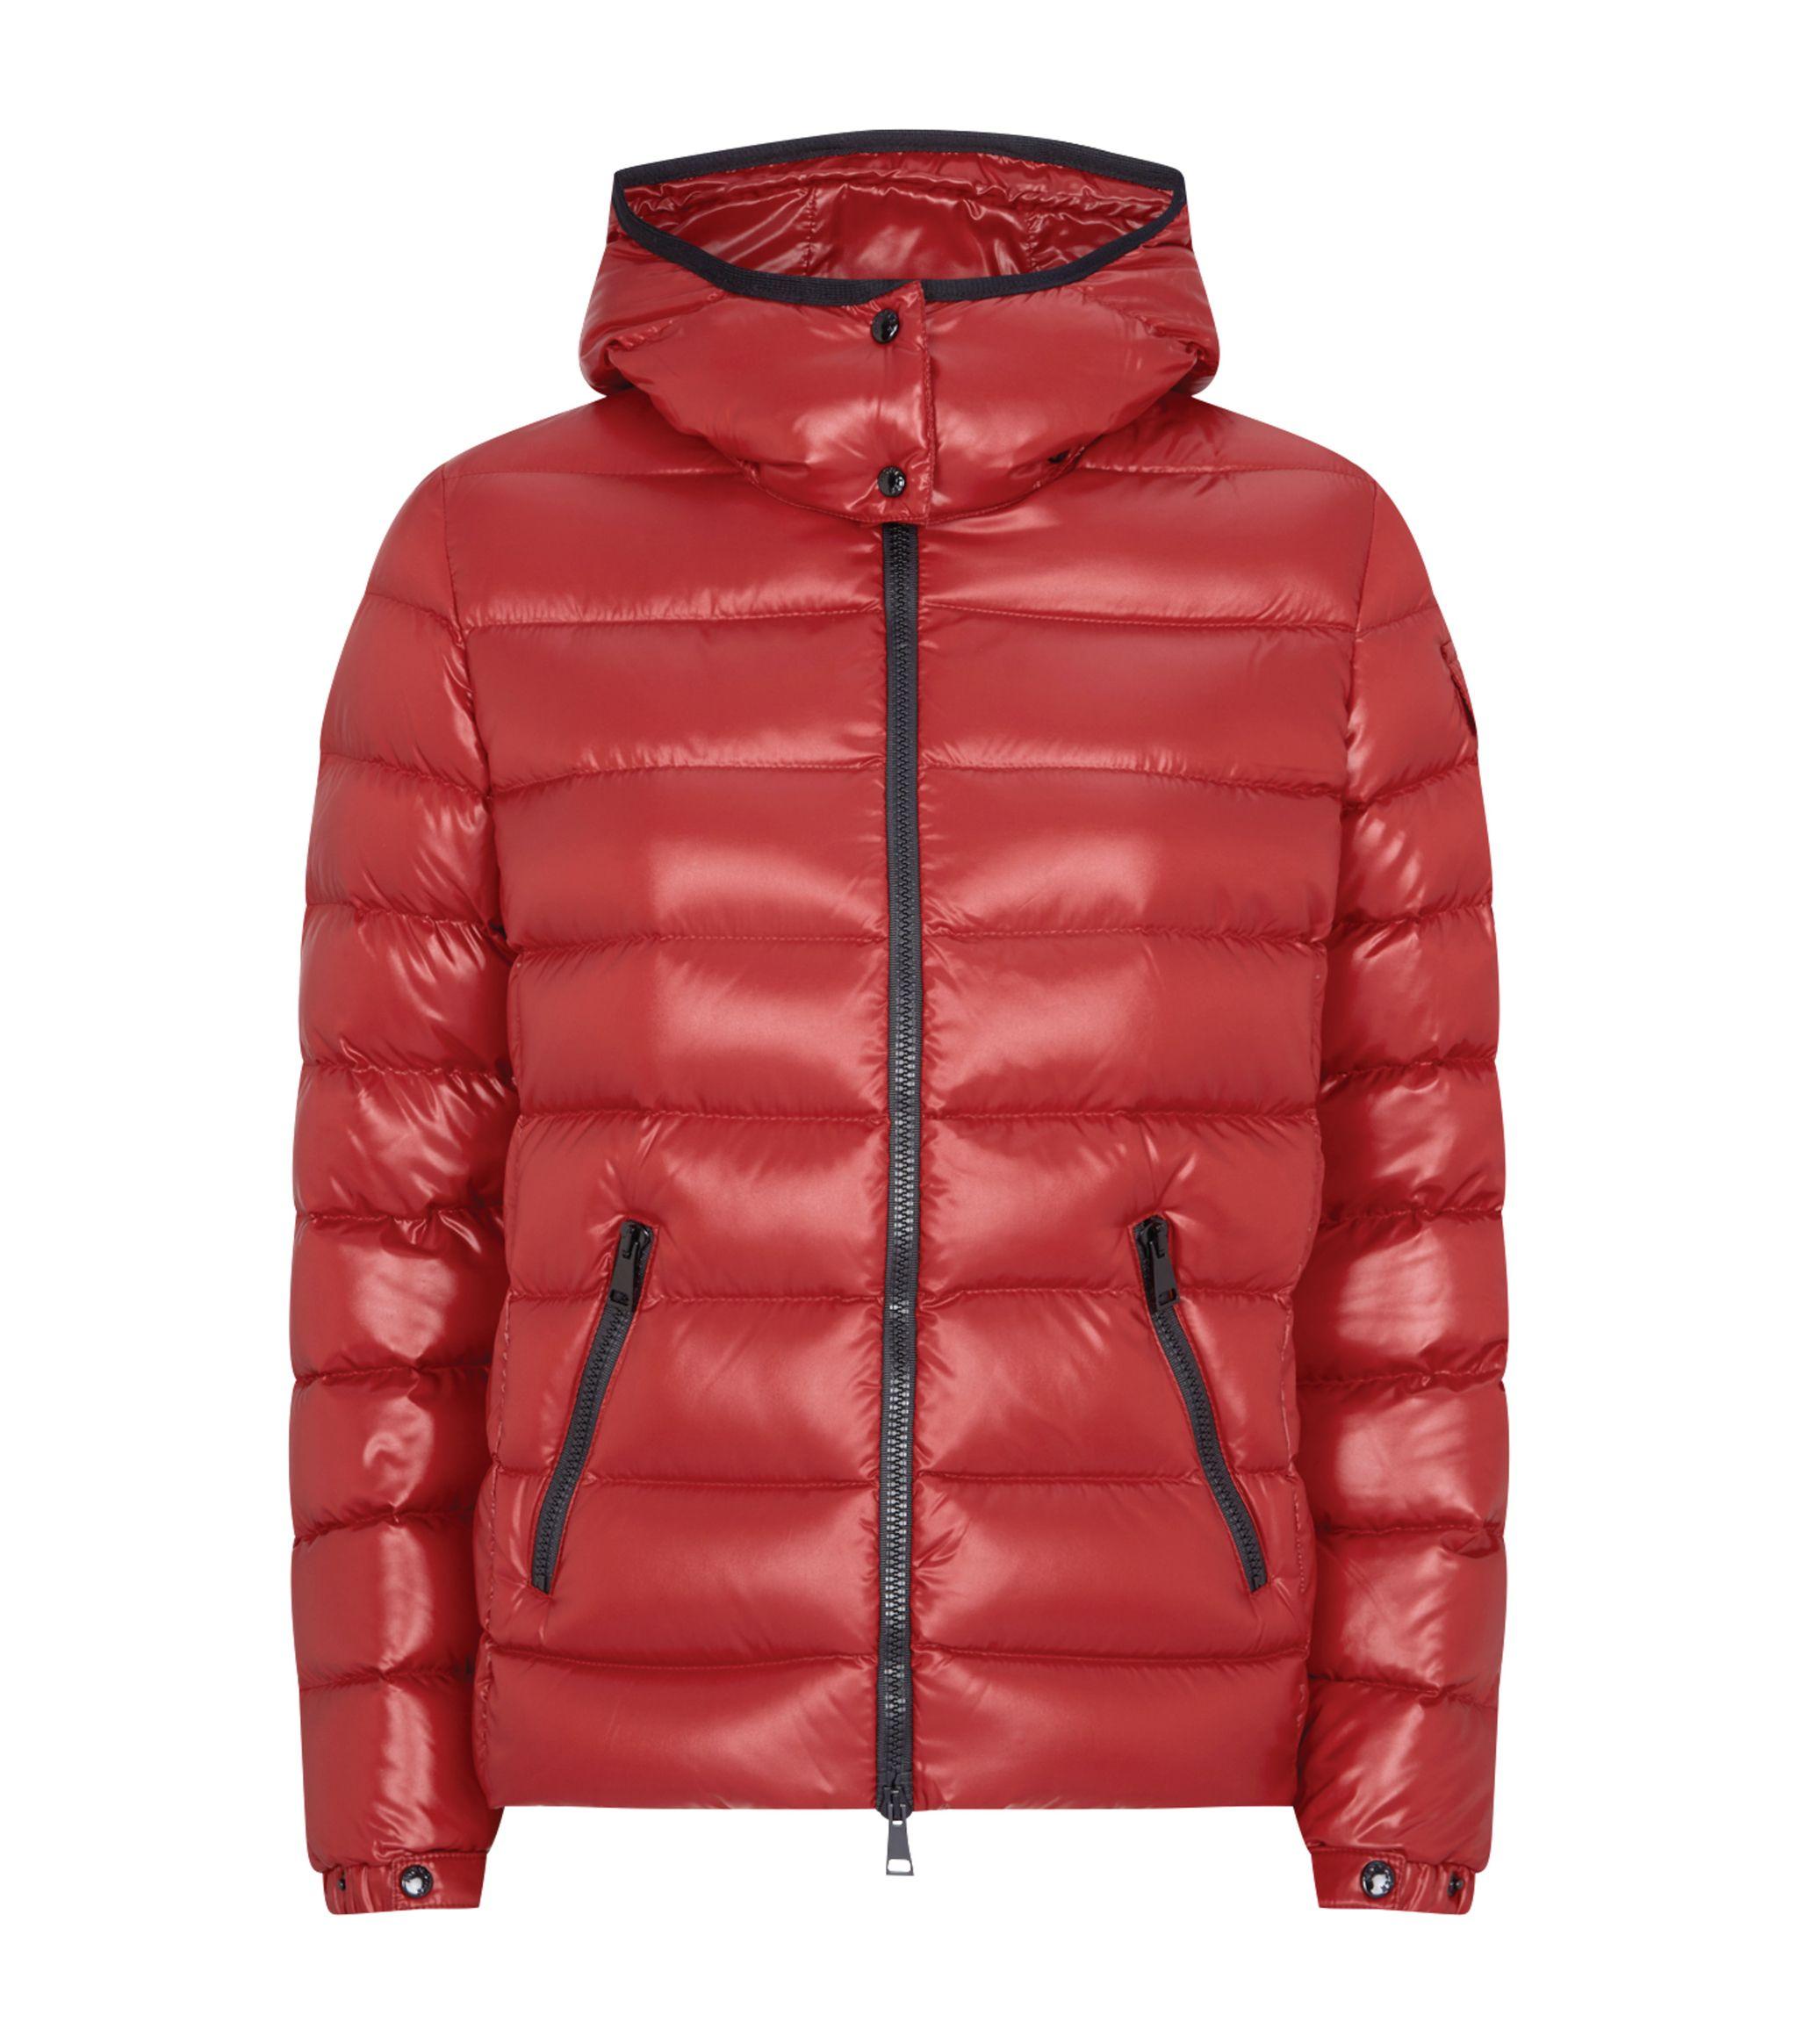 Moncler Goose Bady Hooded Jacket in Red - Lyst